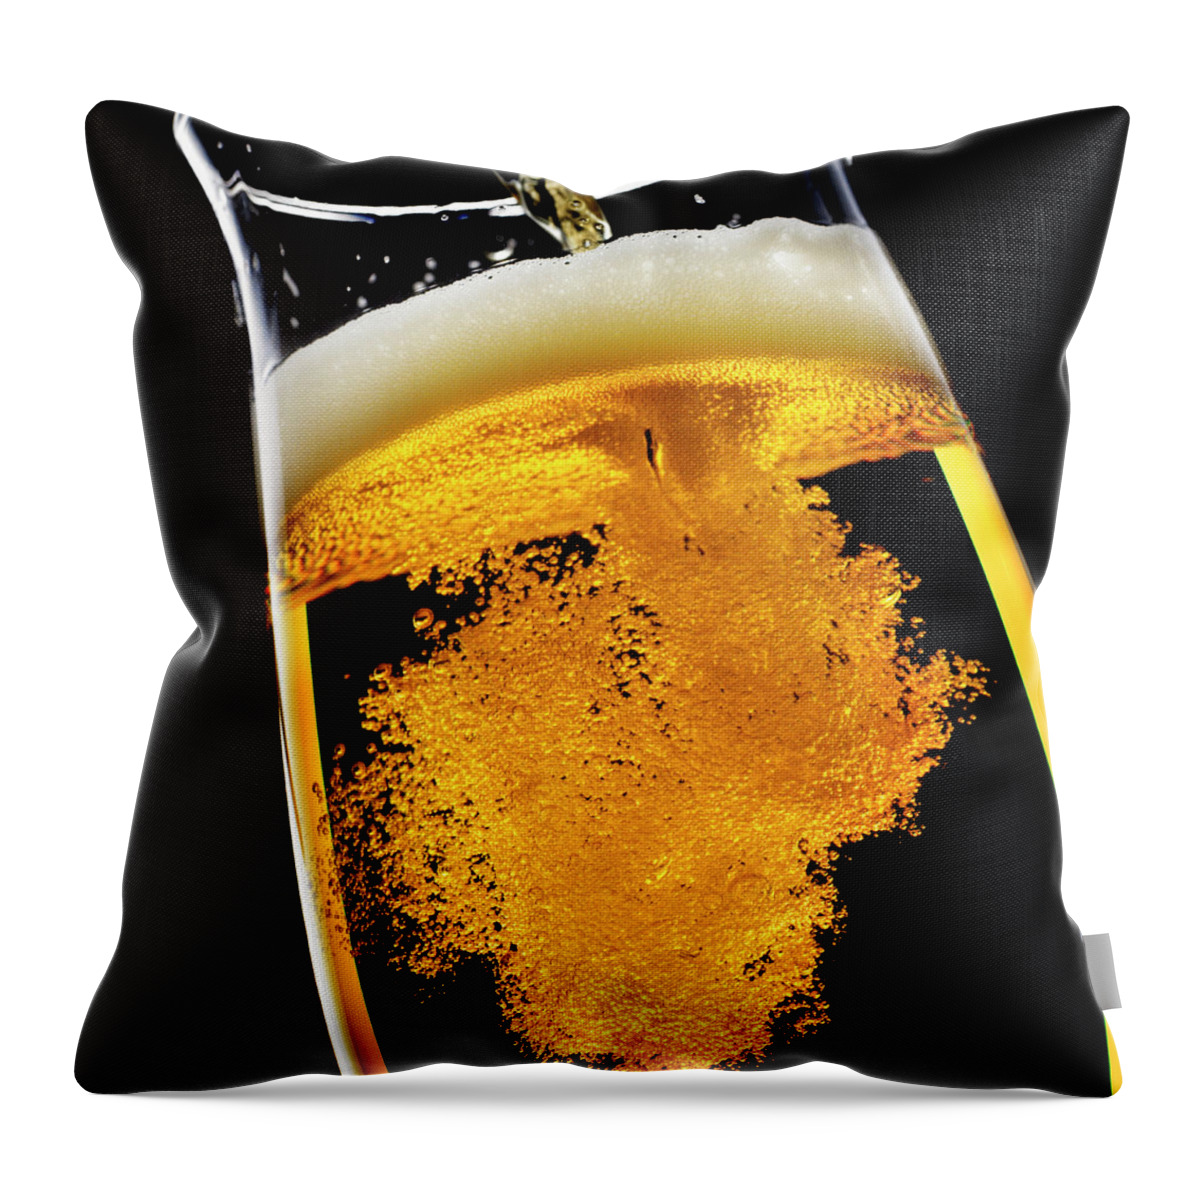 Alcohol Throw Pillow featuring the photograph Beer Been Poured Into Glass, Studio Shot by Ultra.f